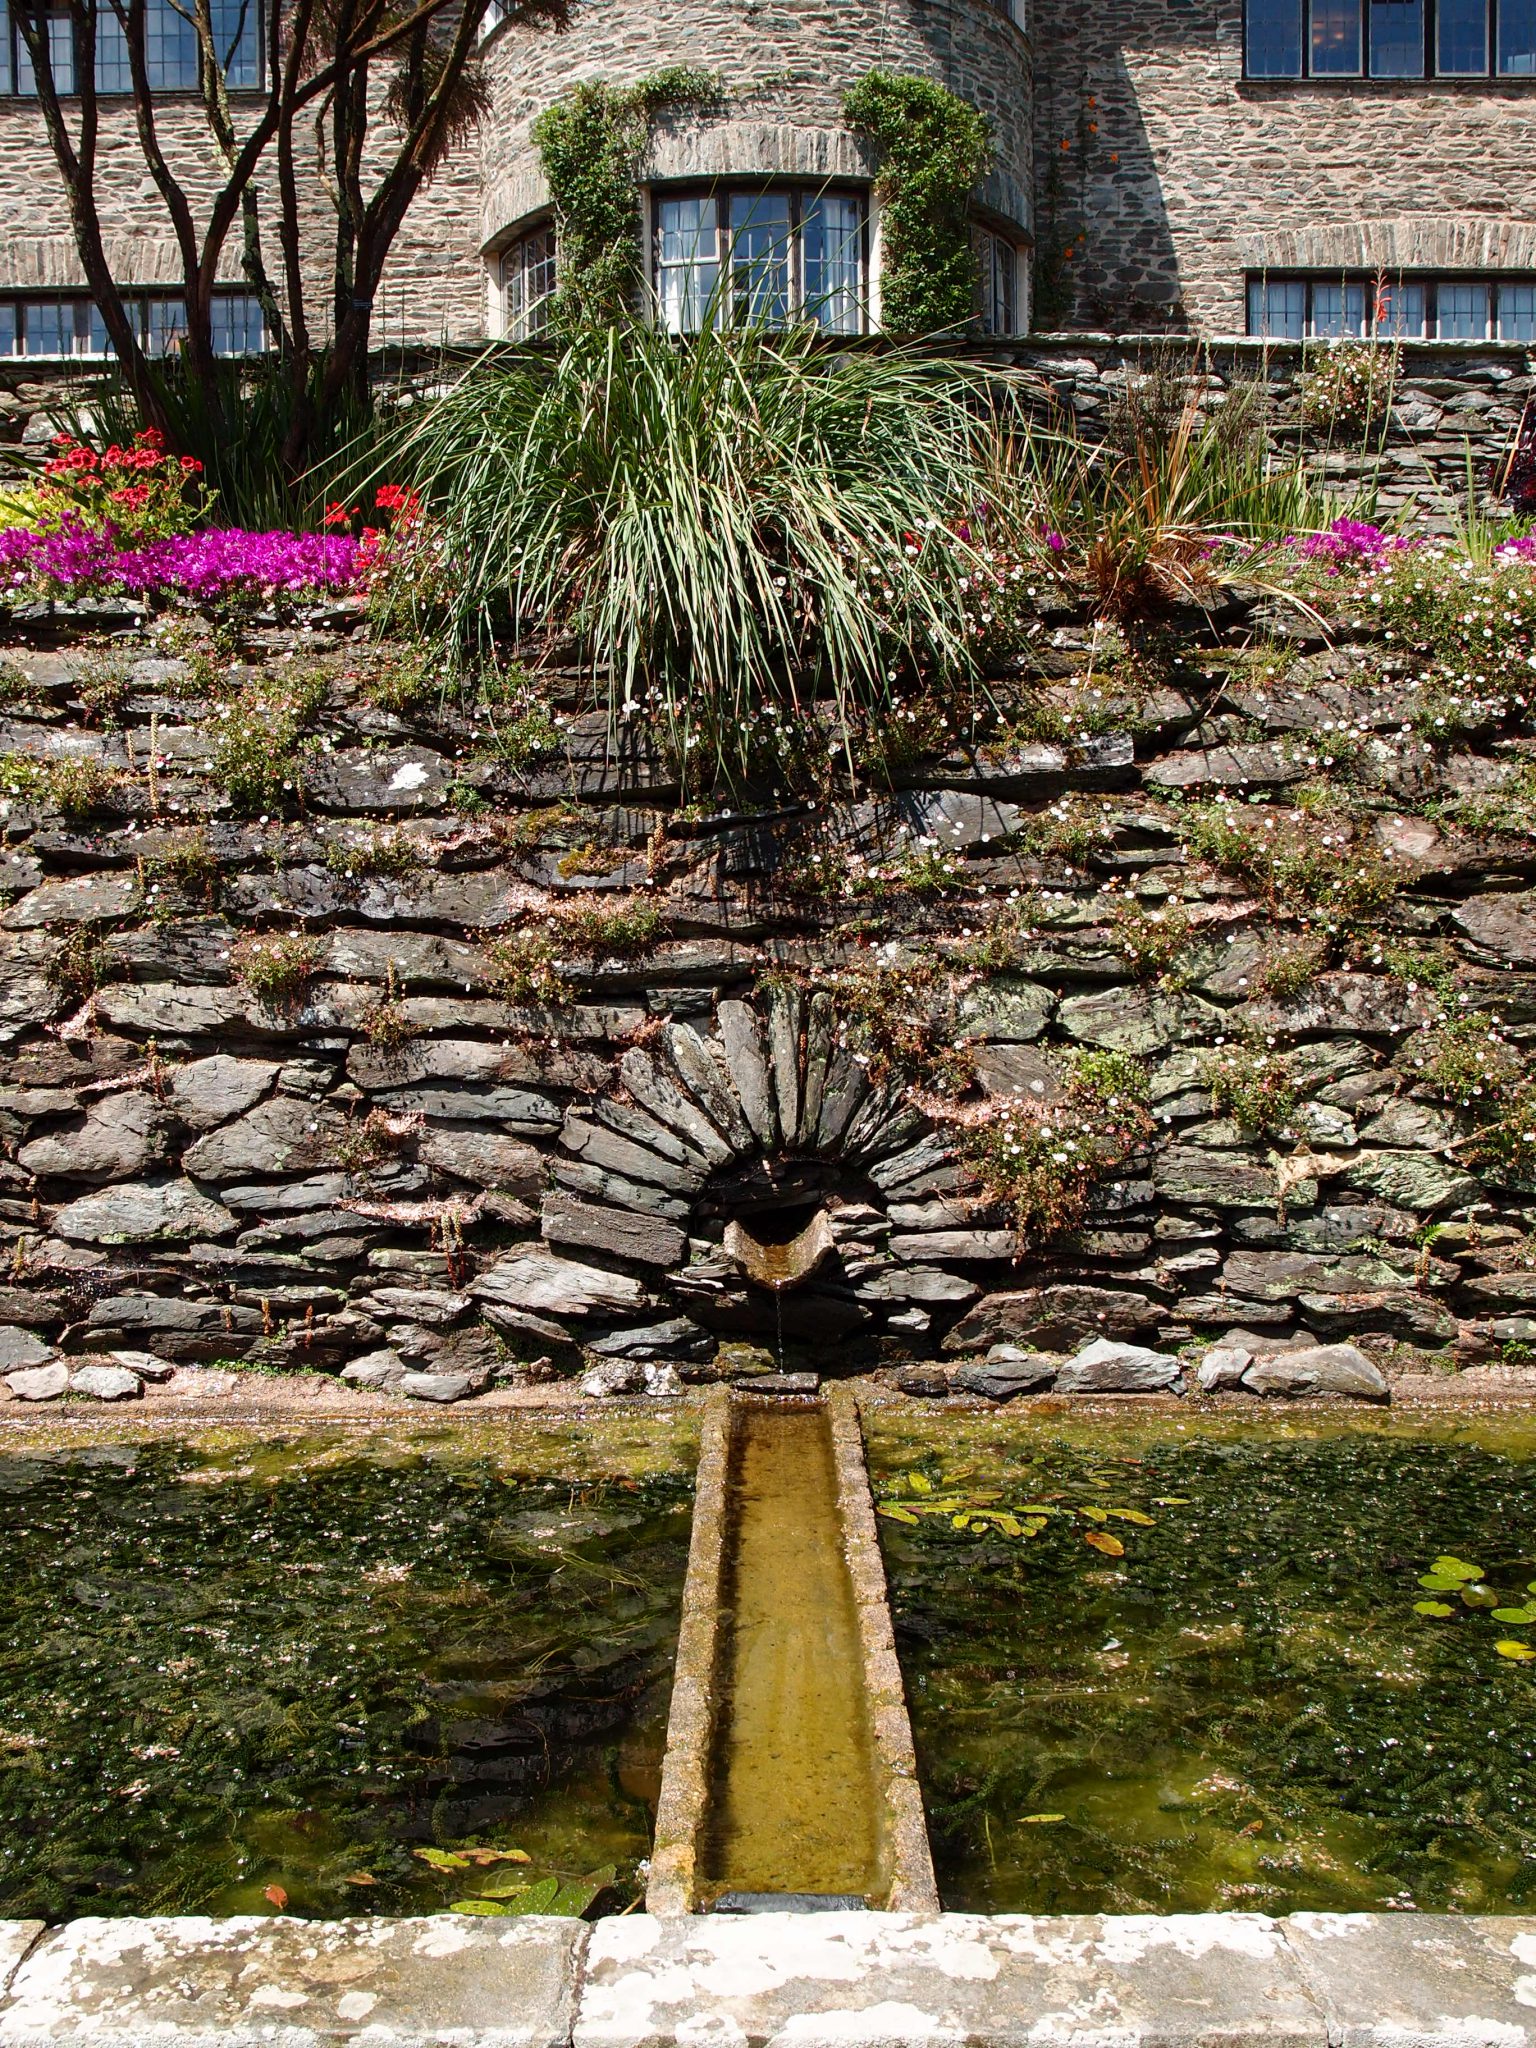 The rectangular pool and fountain on the Lower Terrace (with the Library's Turret wing directly above). The retaining walls of the Lower Terrace are covered with Mexican daisies.